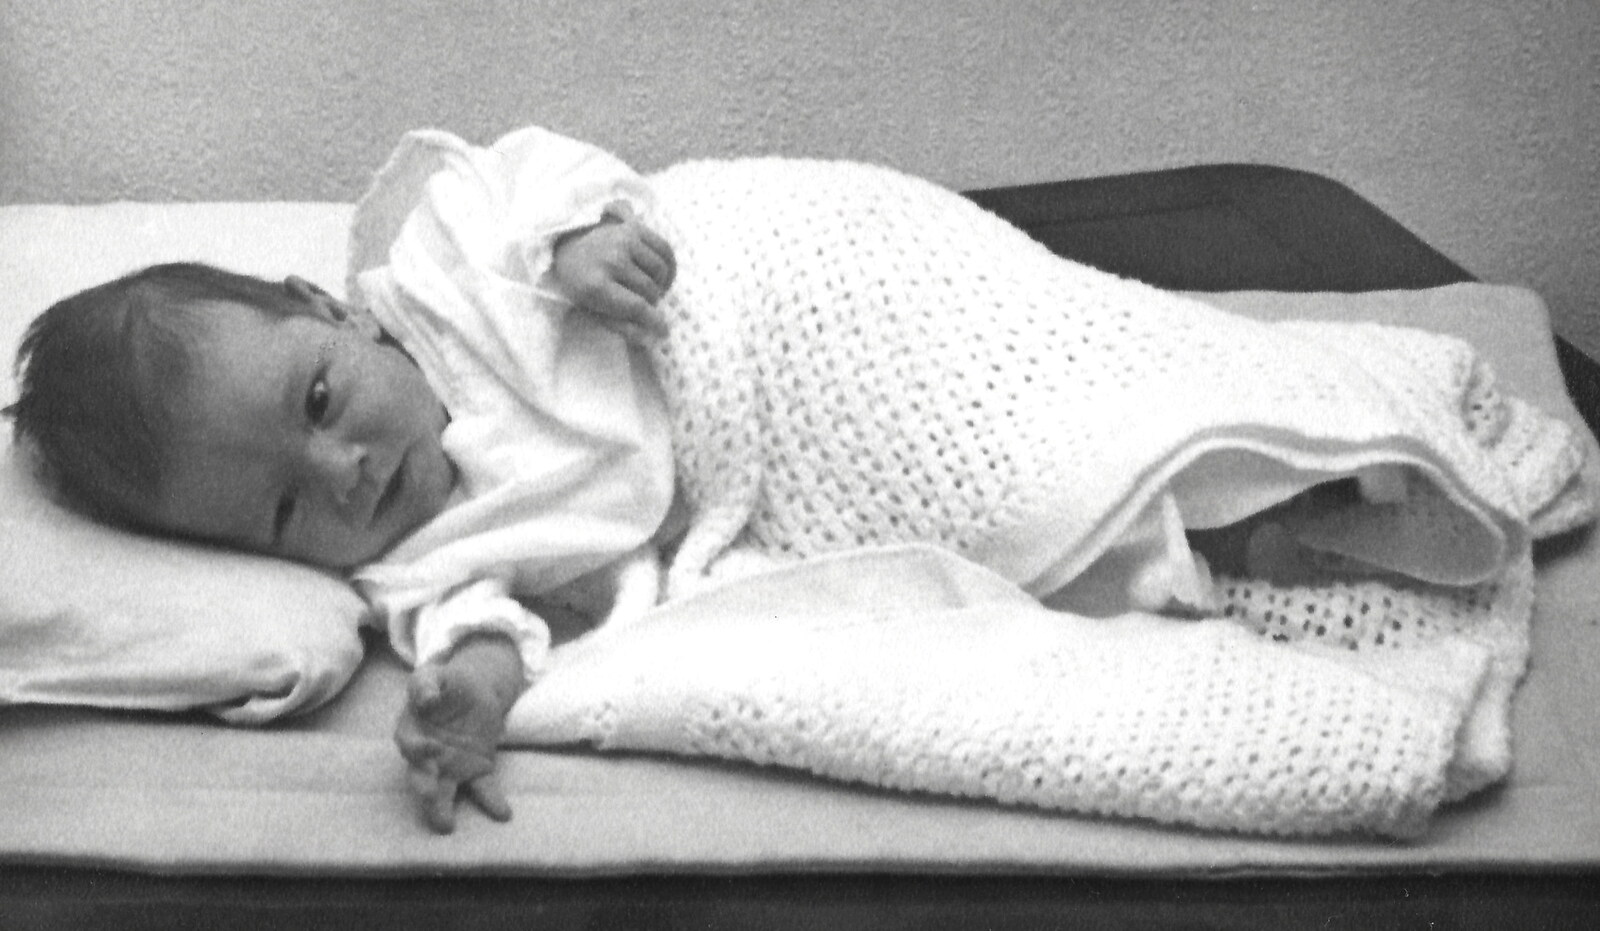 Family History: The 1940s and 1950s - 24th January 2020: Mystery baby